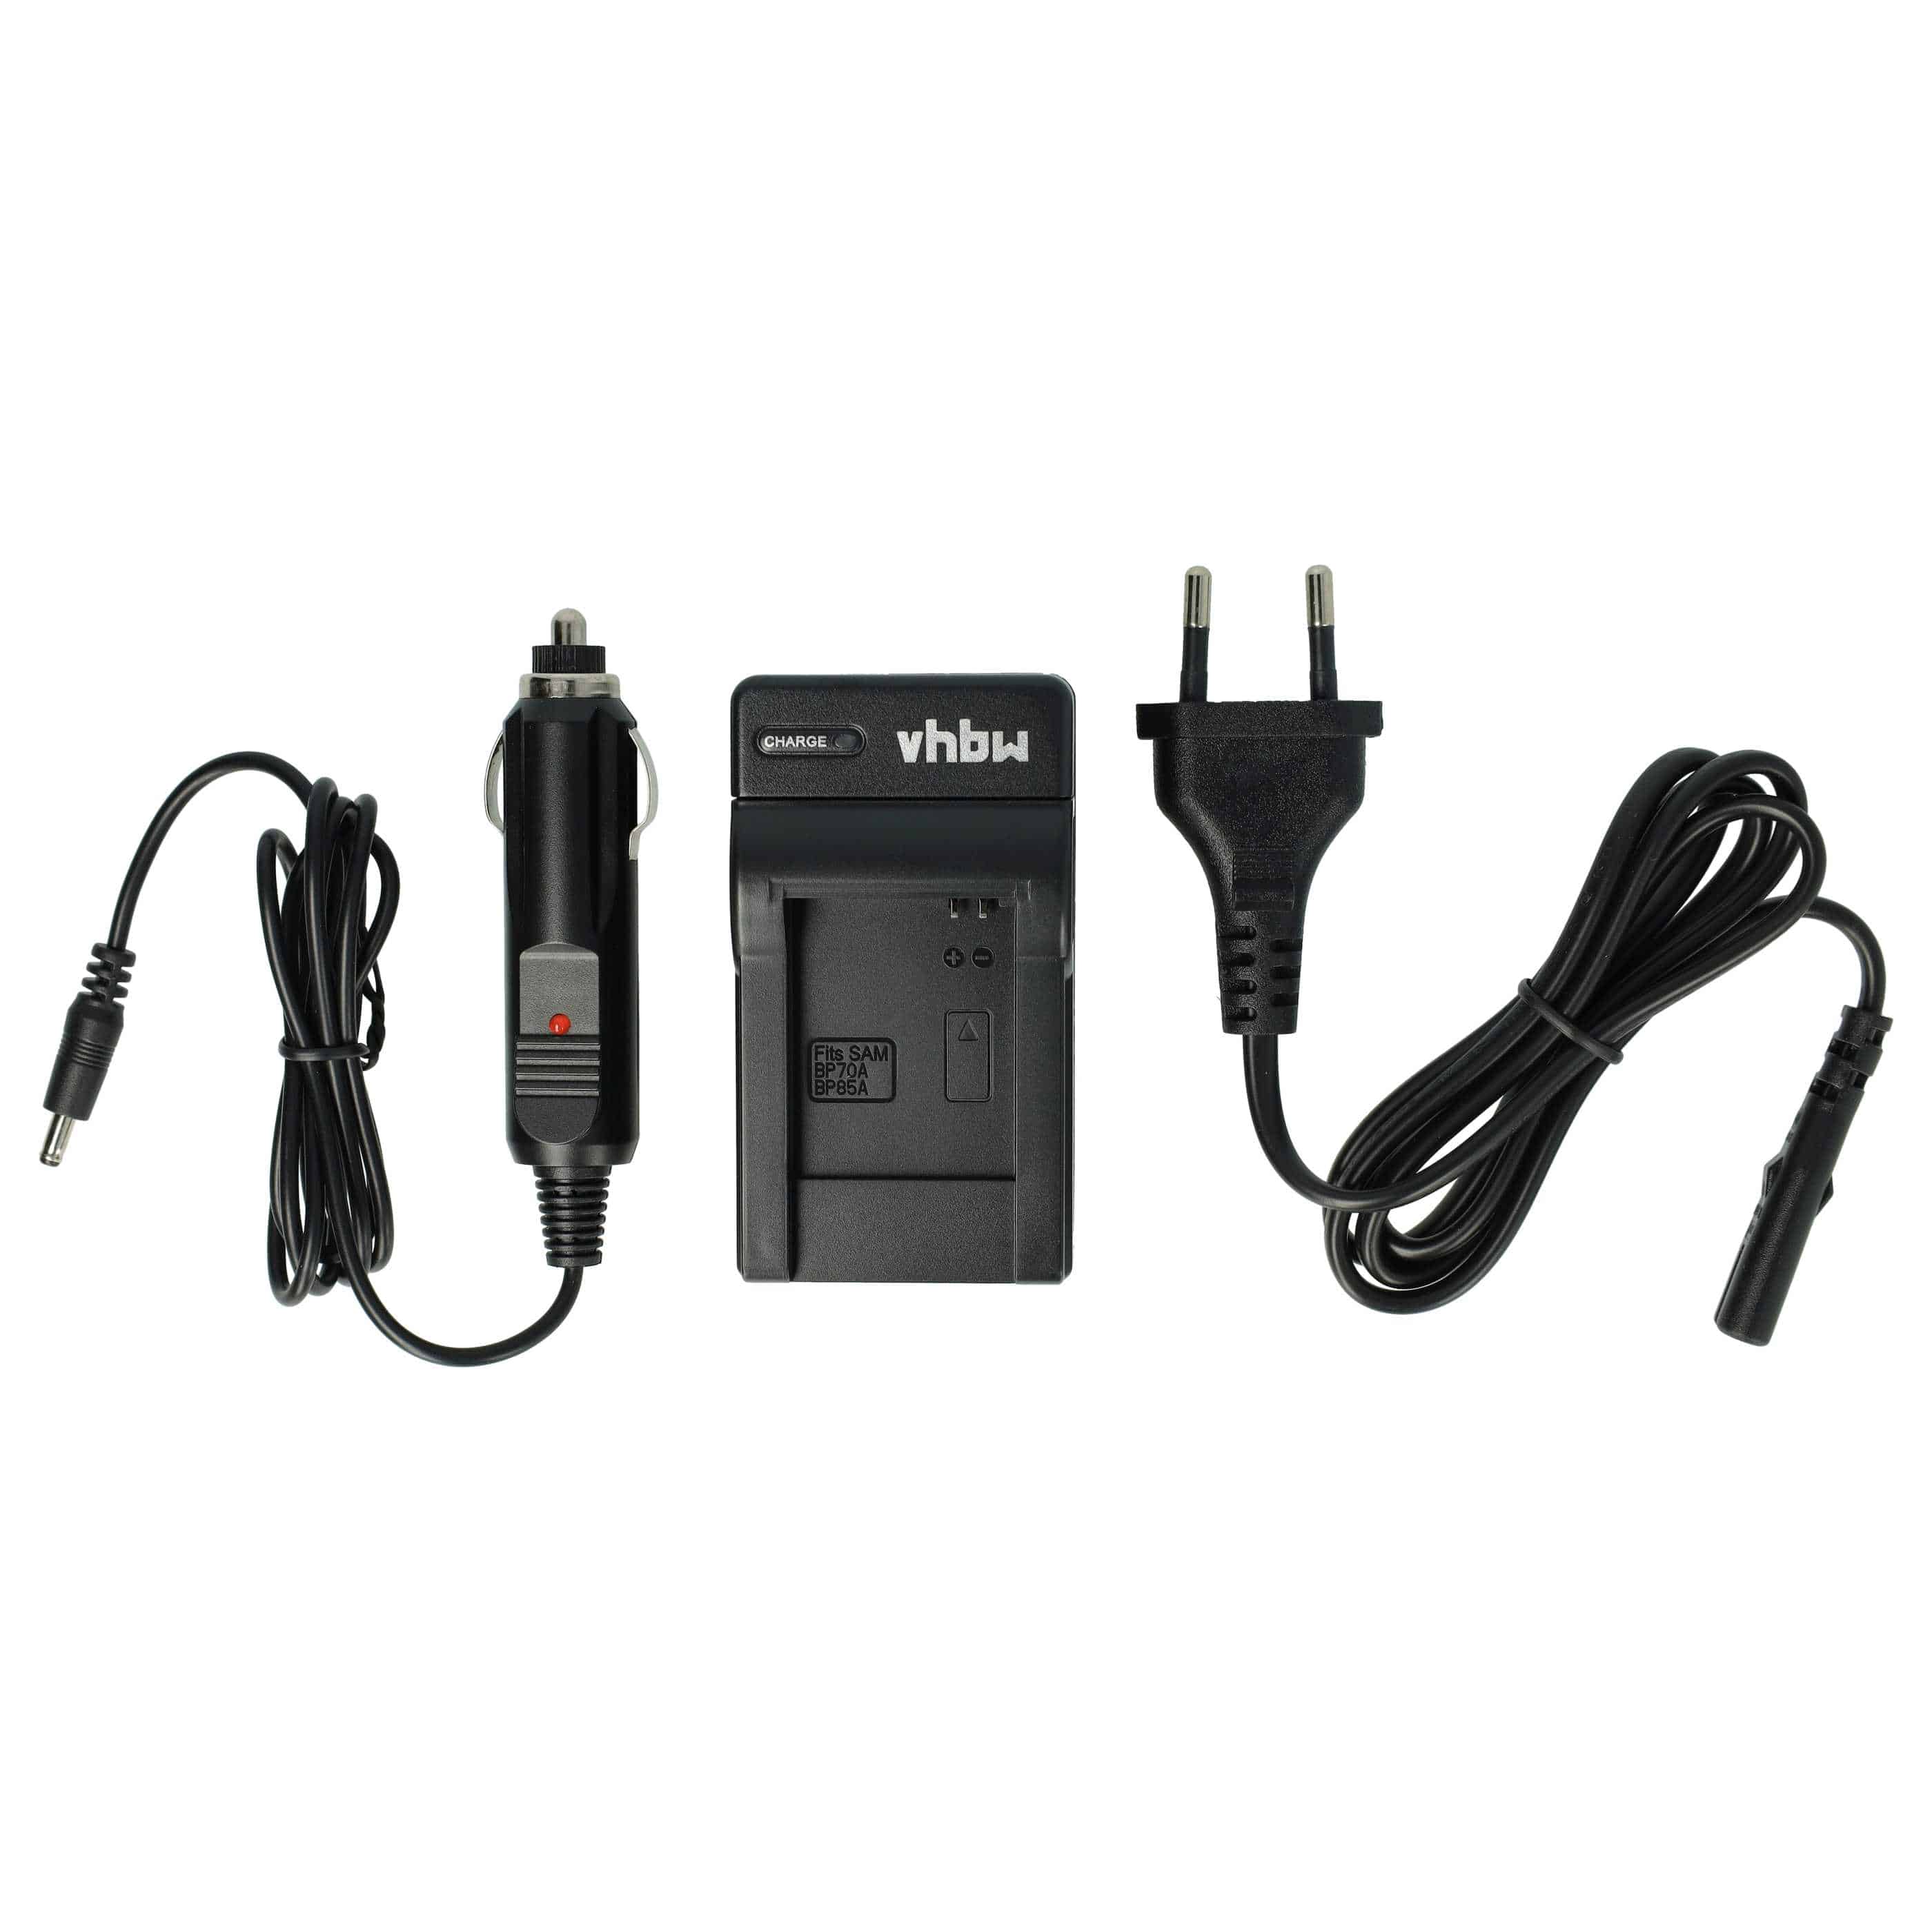 Battery Charger suitable for Samsung BP-85a Camera etc. - 0.6 A, 4.2 V